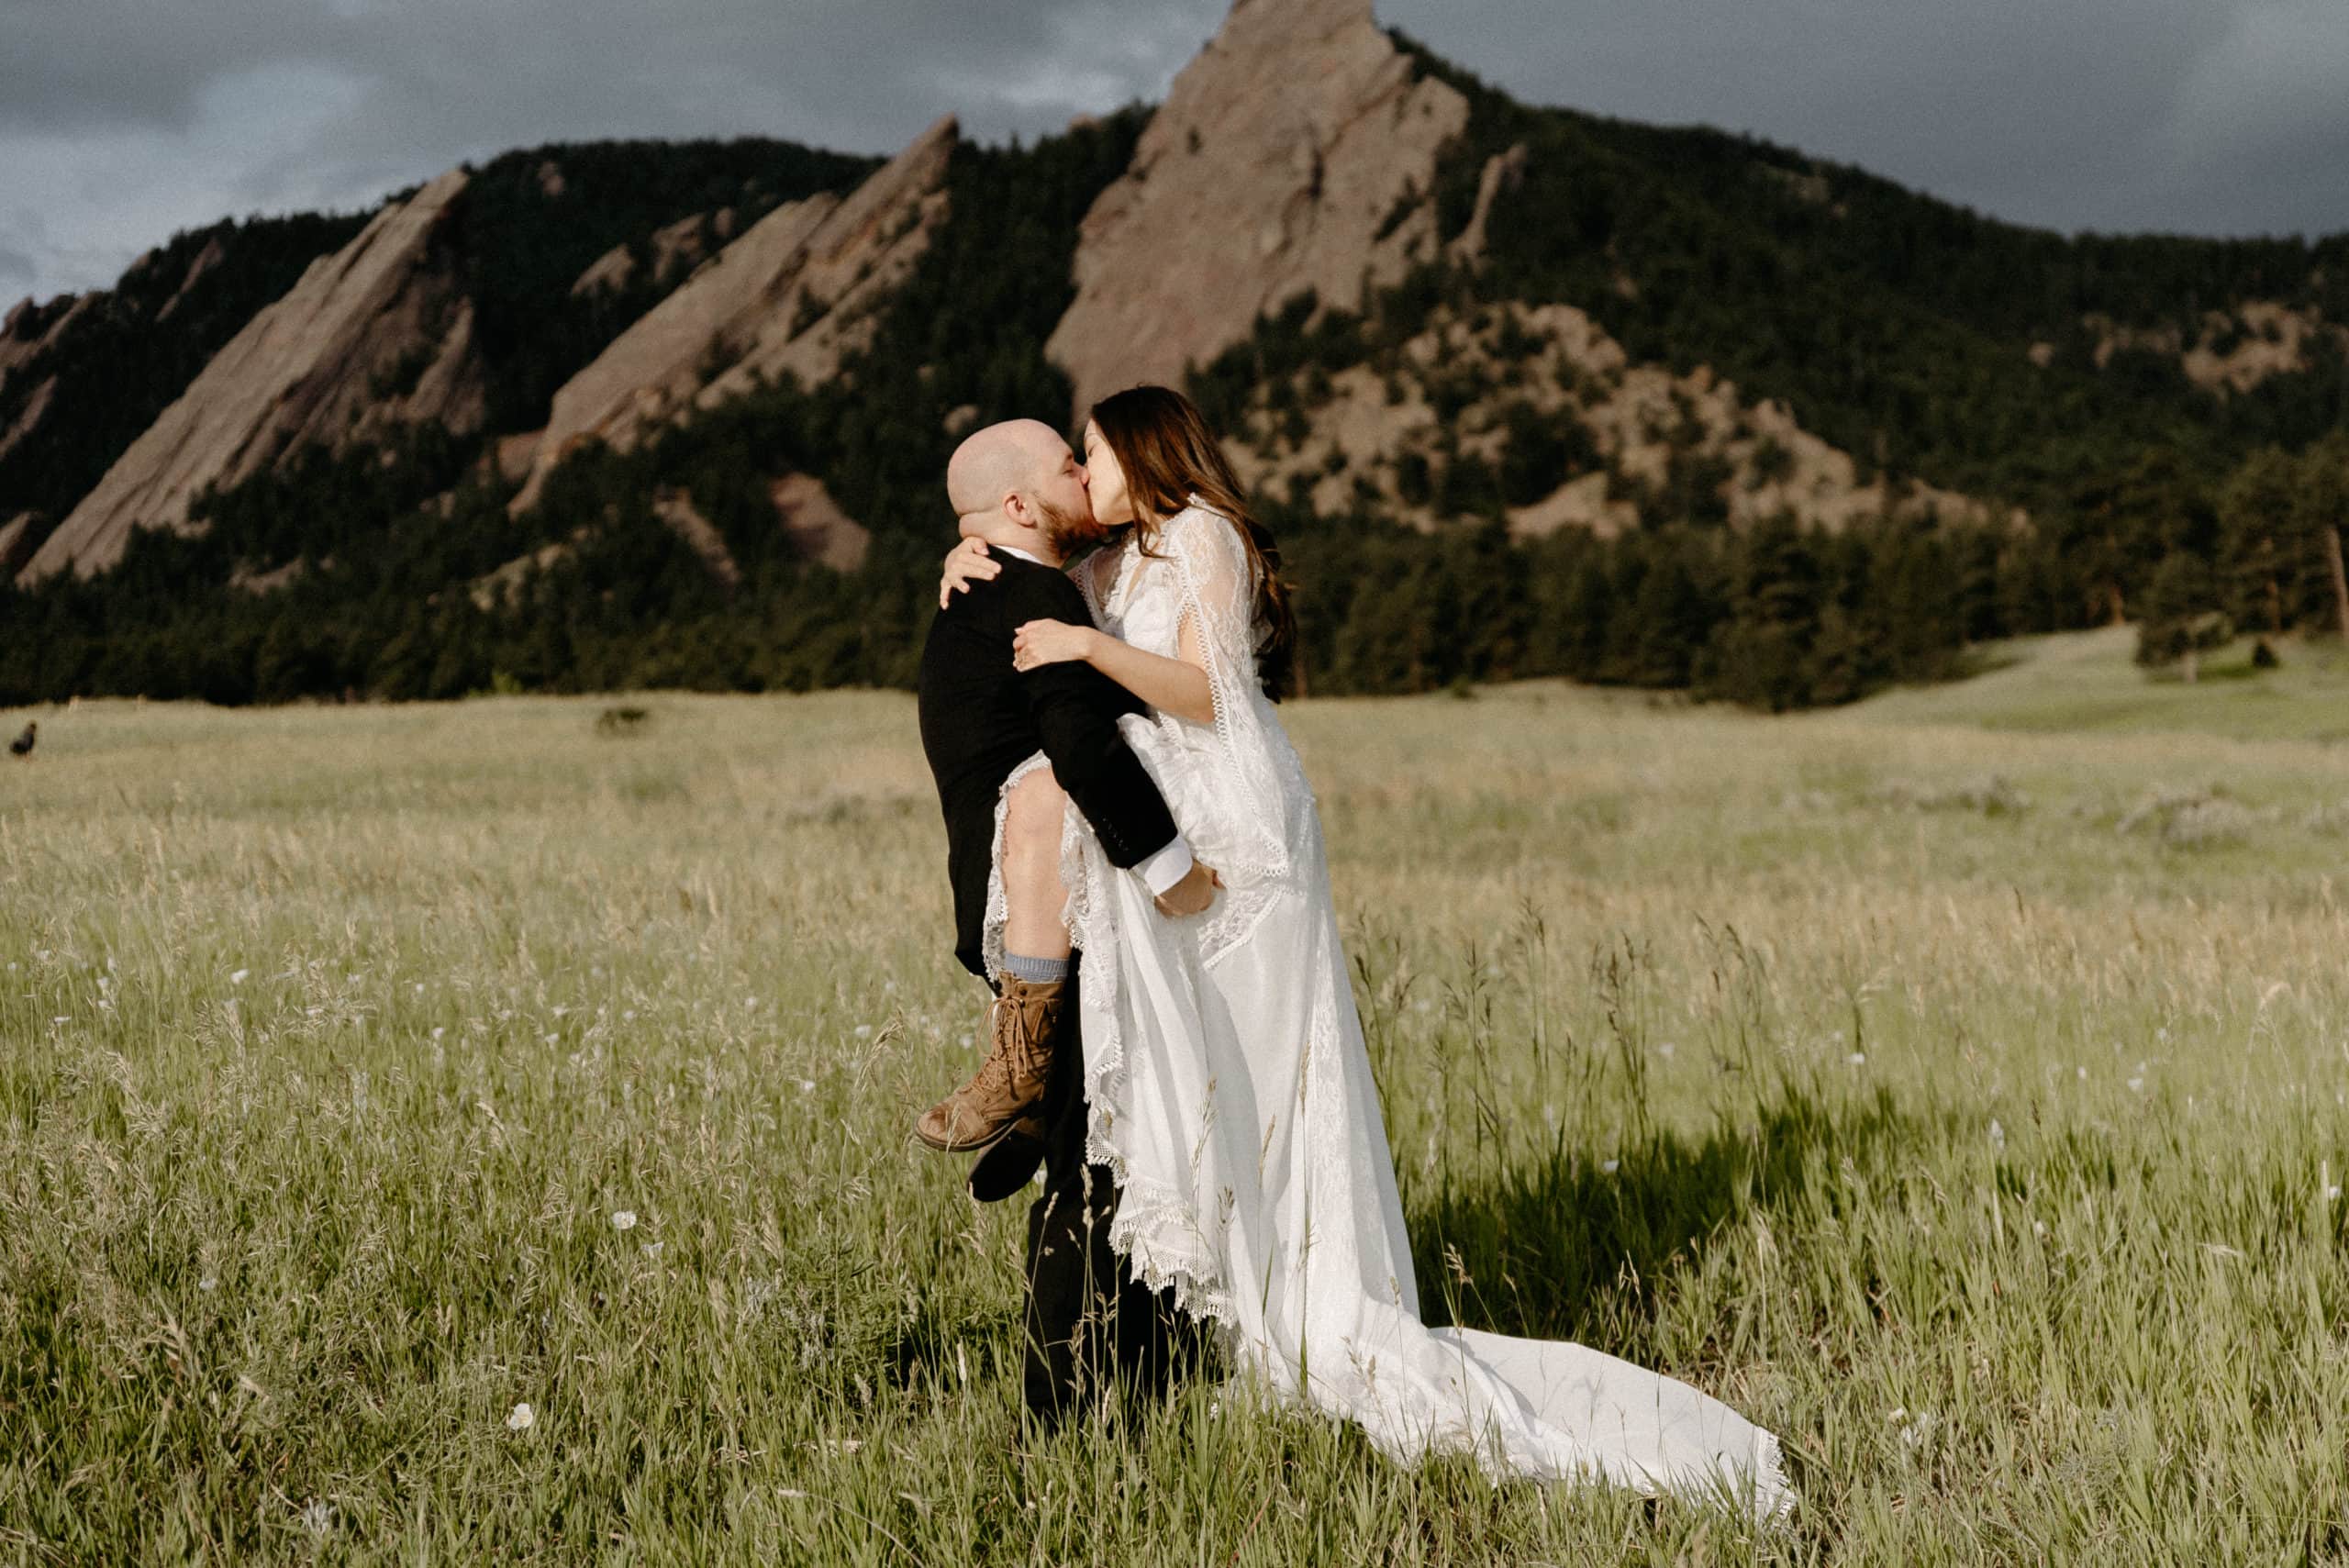 Bride jumps into grooms arms at Chautauqua Park elopement Location in Boulder